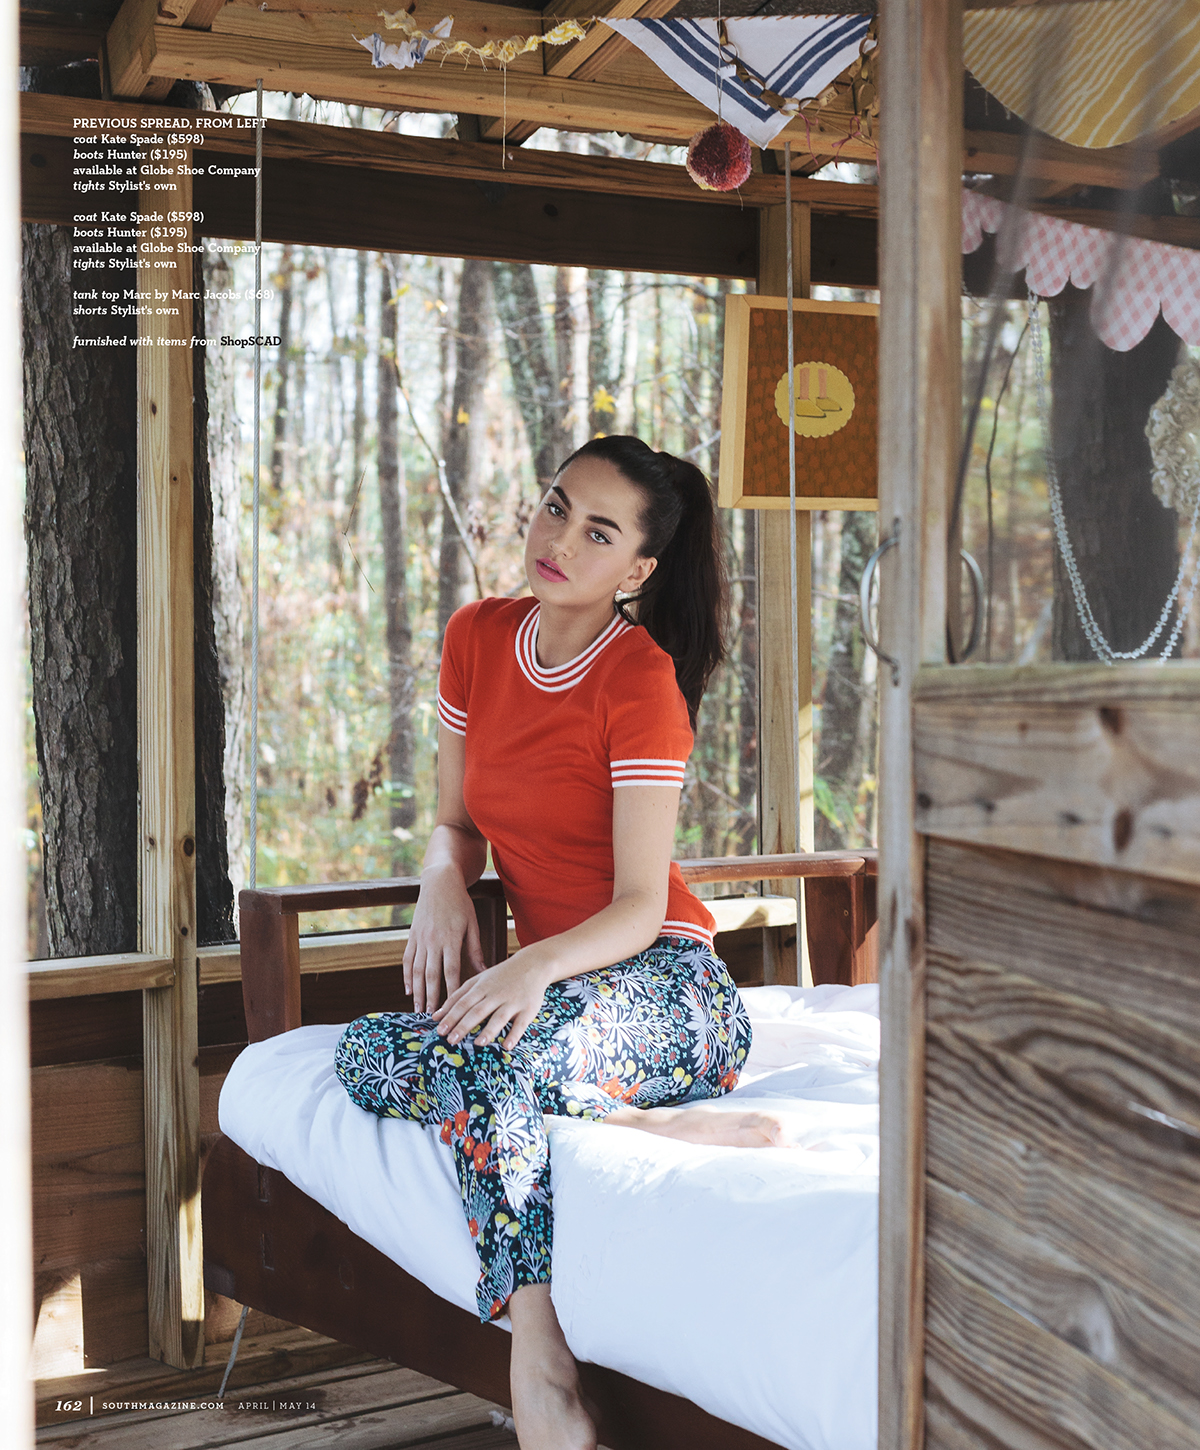 South Magazine fashion photography SCAD cover portrait camp glamp